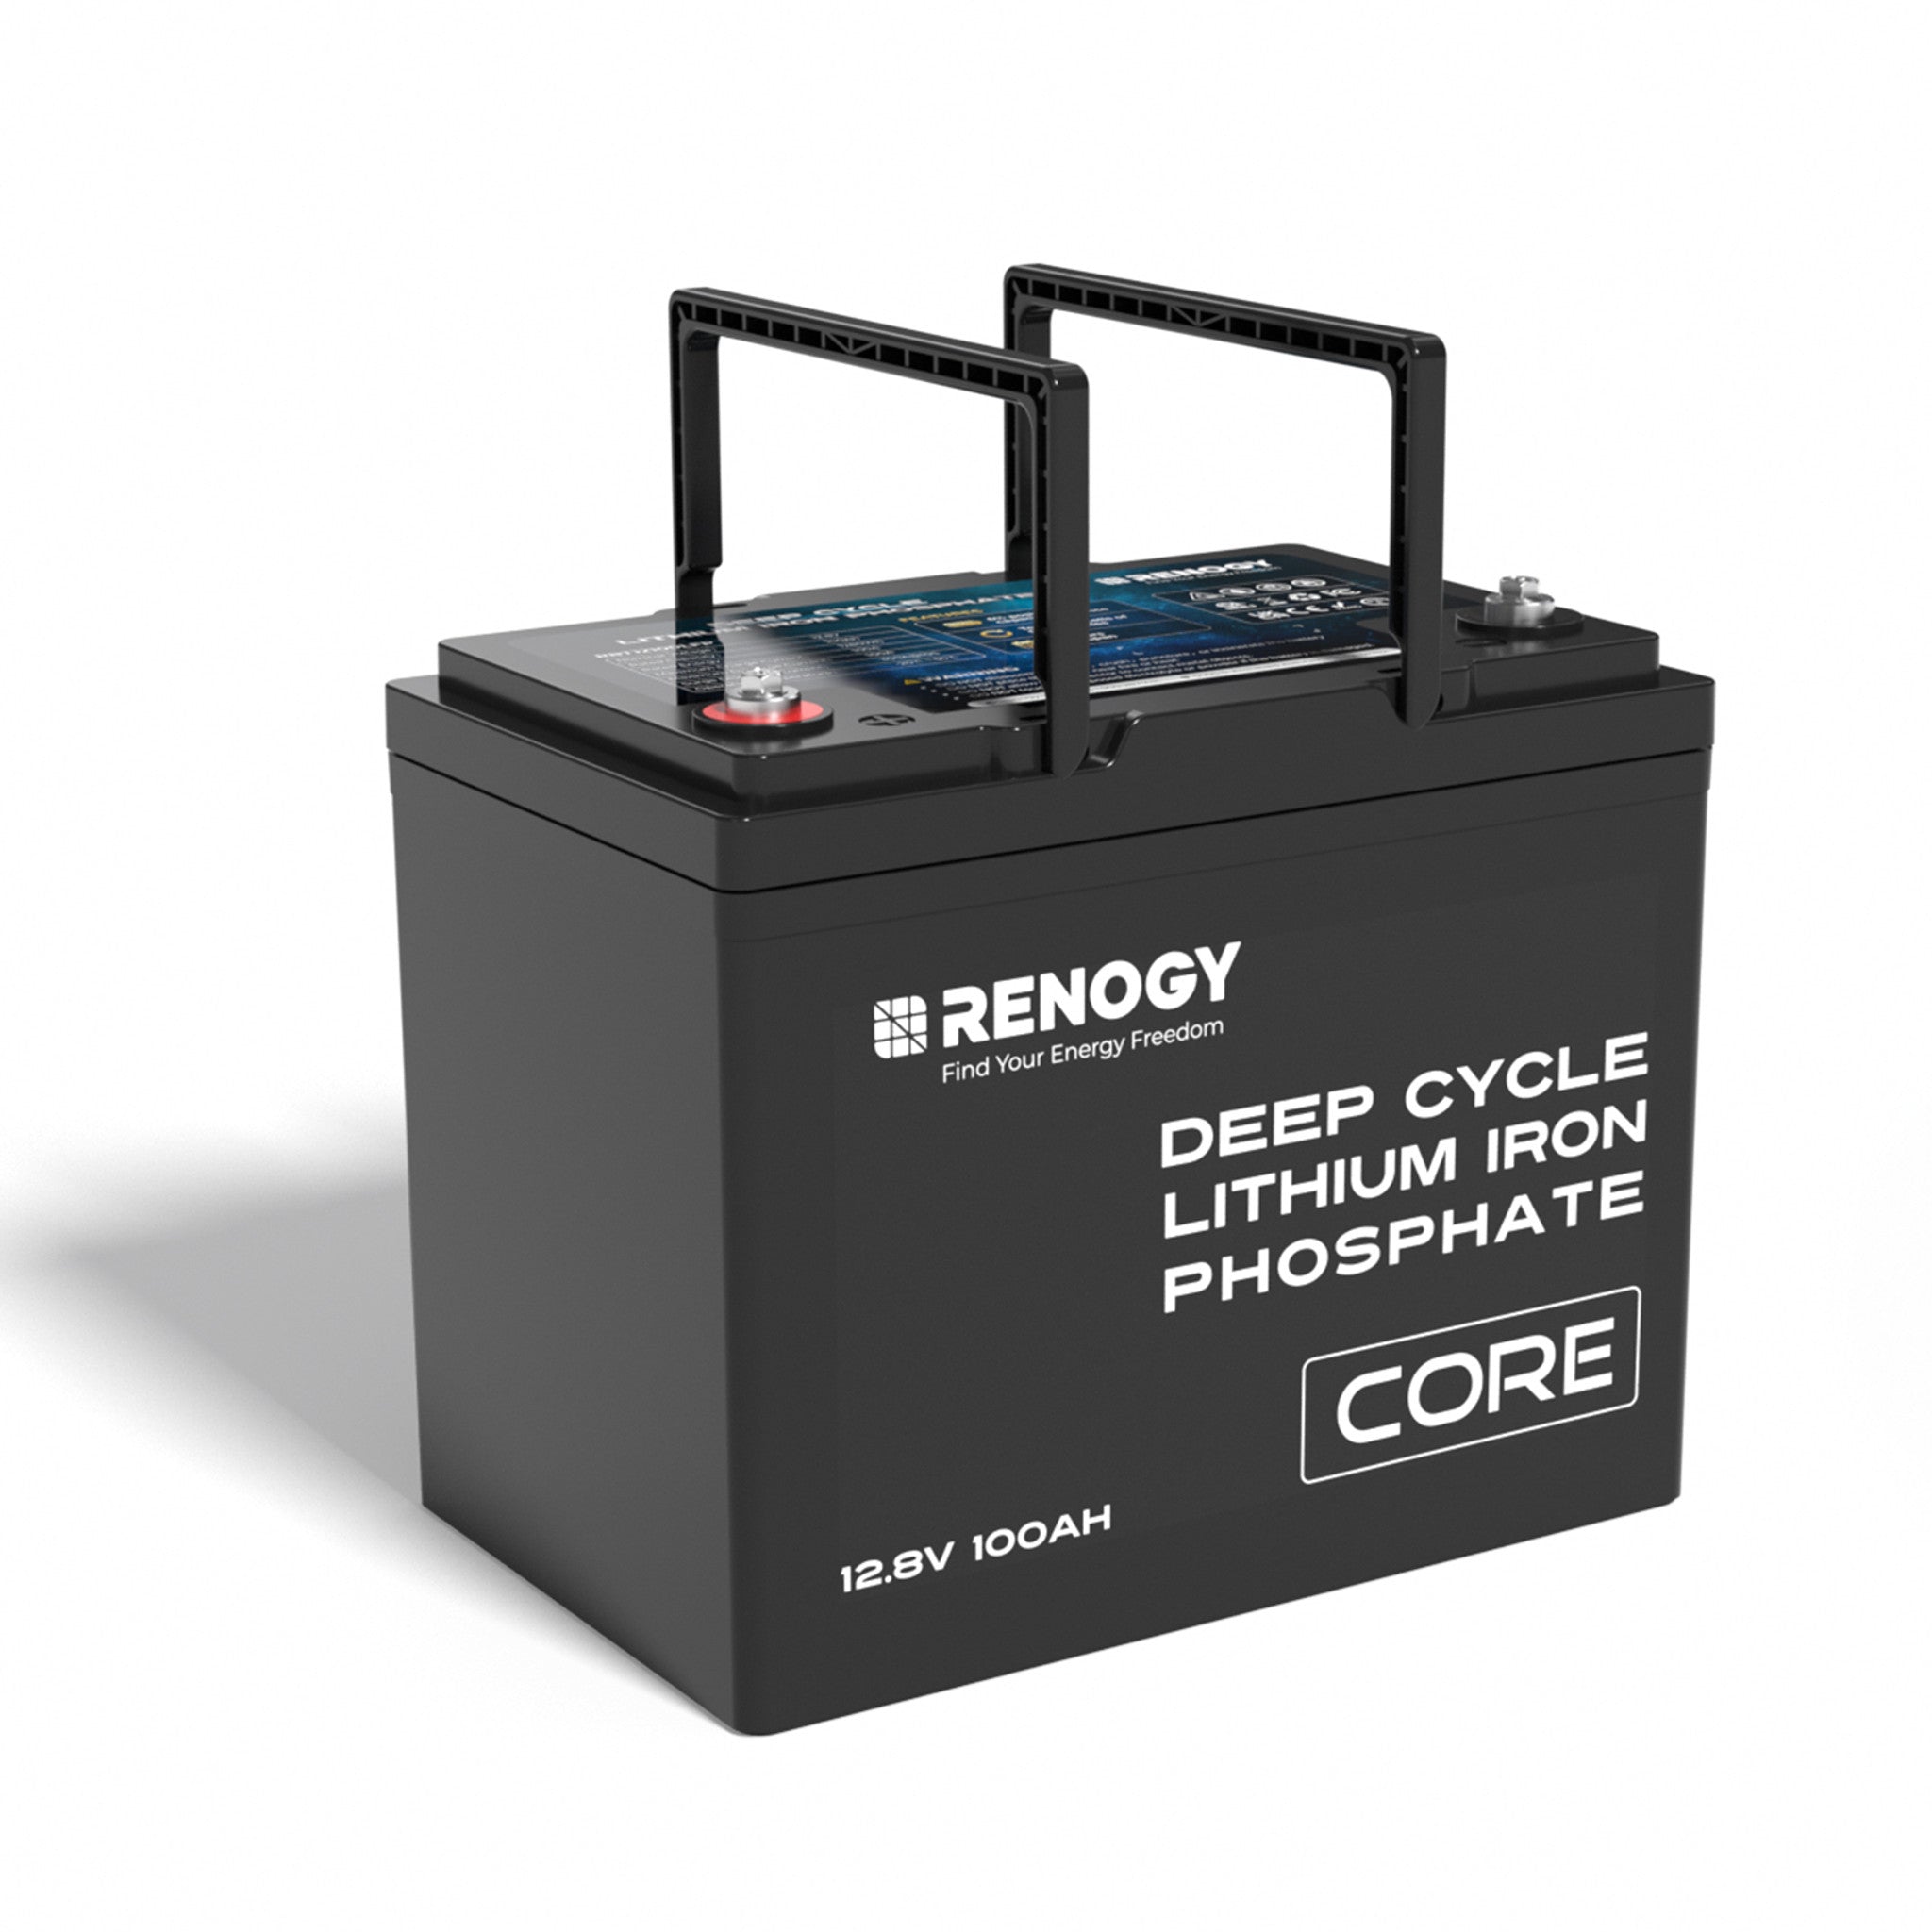 LiFePO4 Deep Cycle Lithium Battery - Ben's Discount Supply